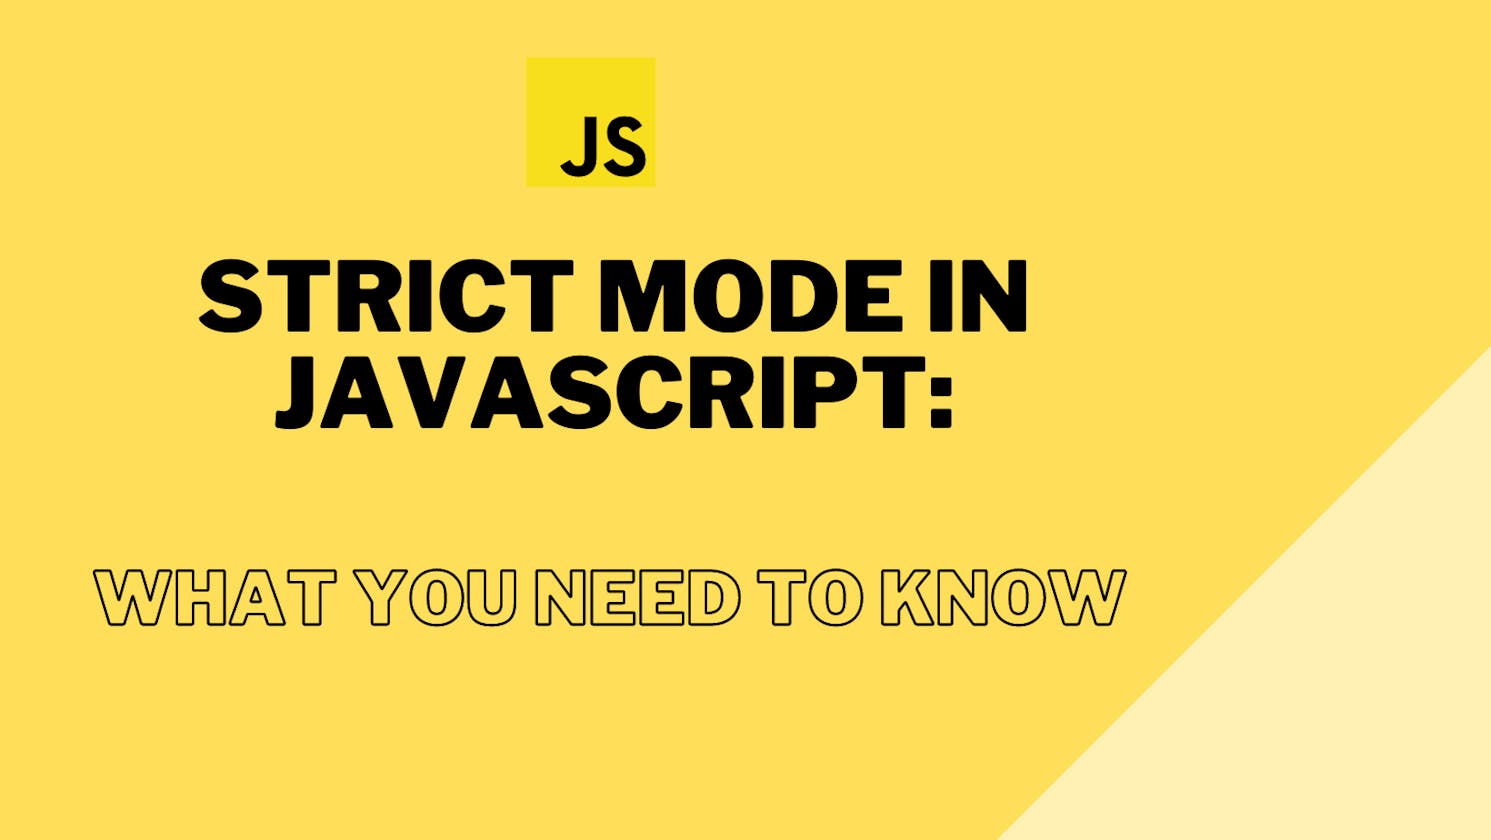 Strict mode in JavaScript: What you need to know